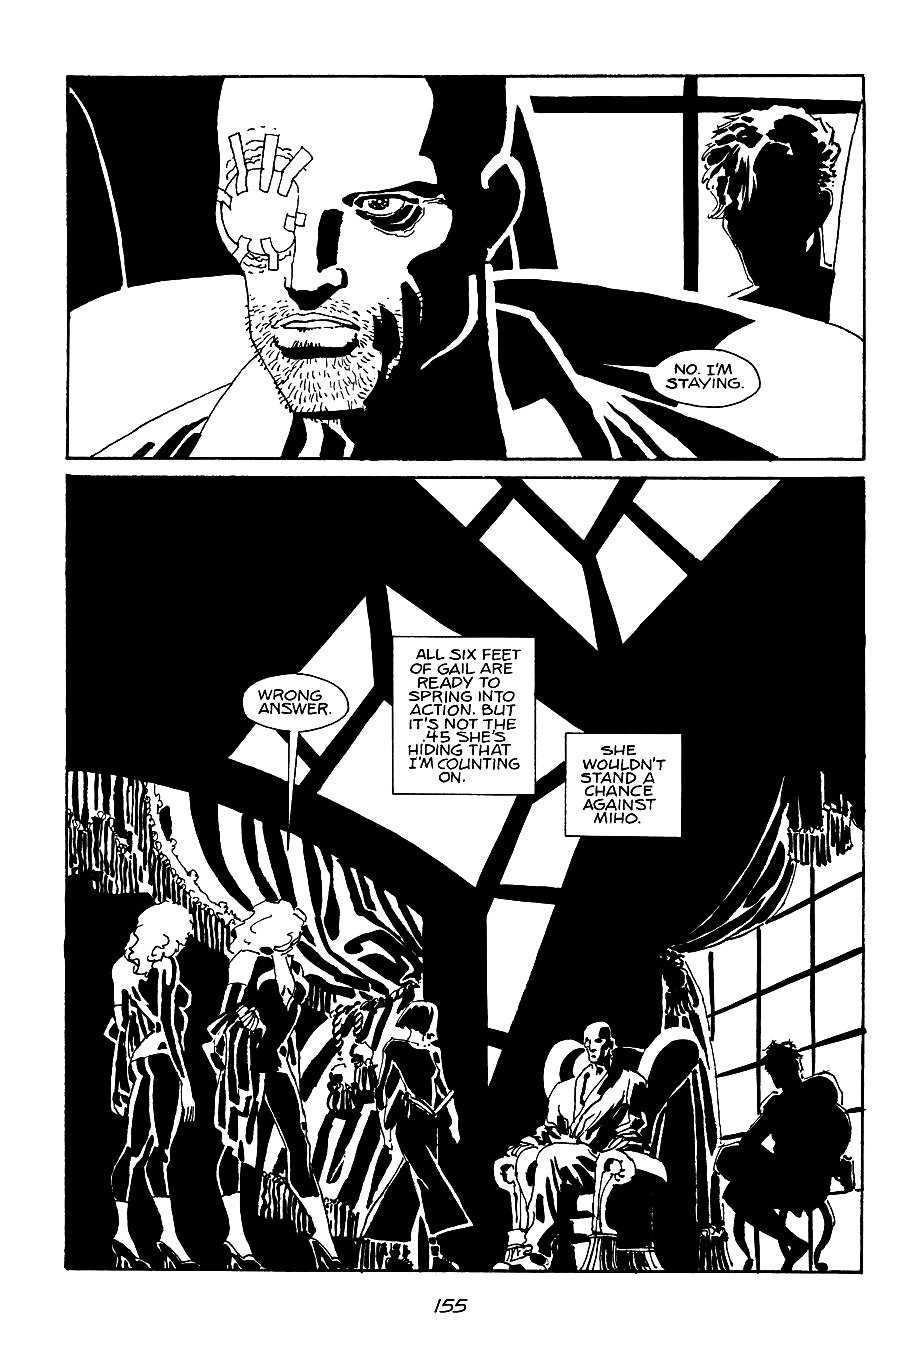 page 155 of sin city 2 the hard goodbye